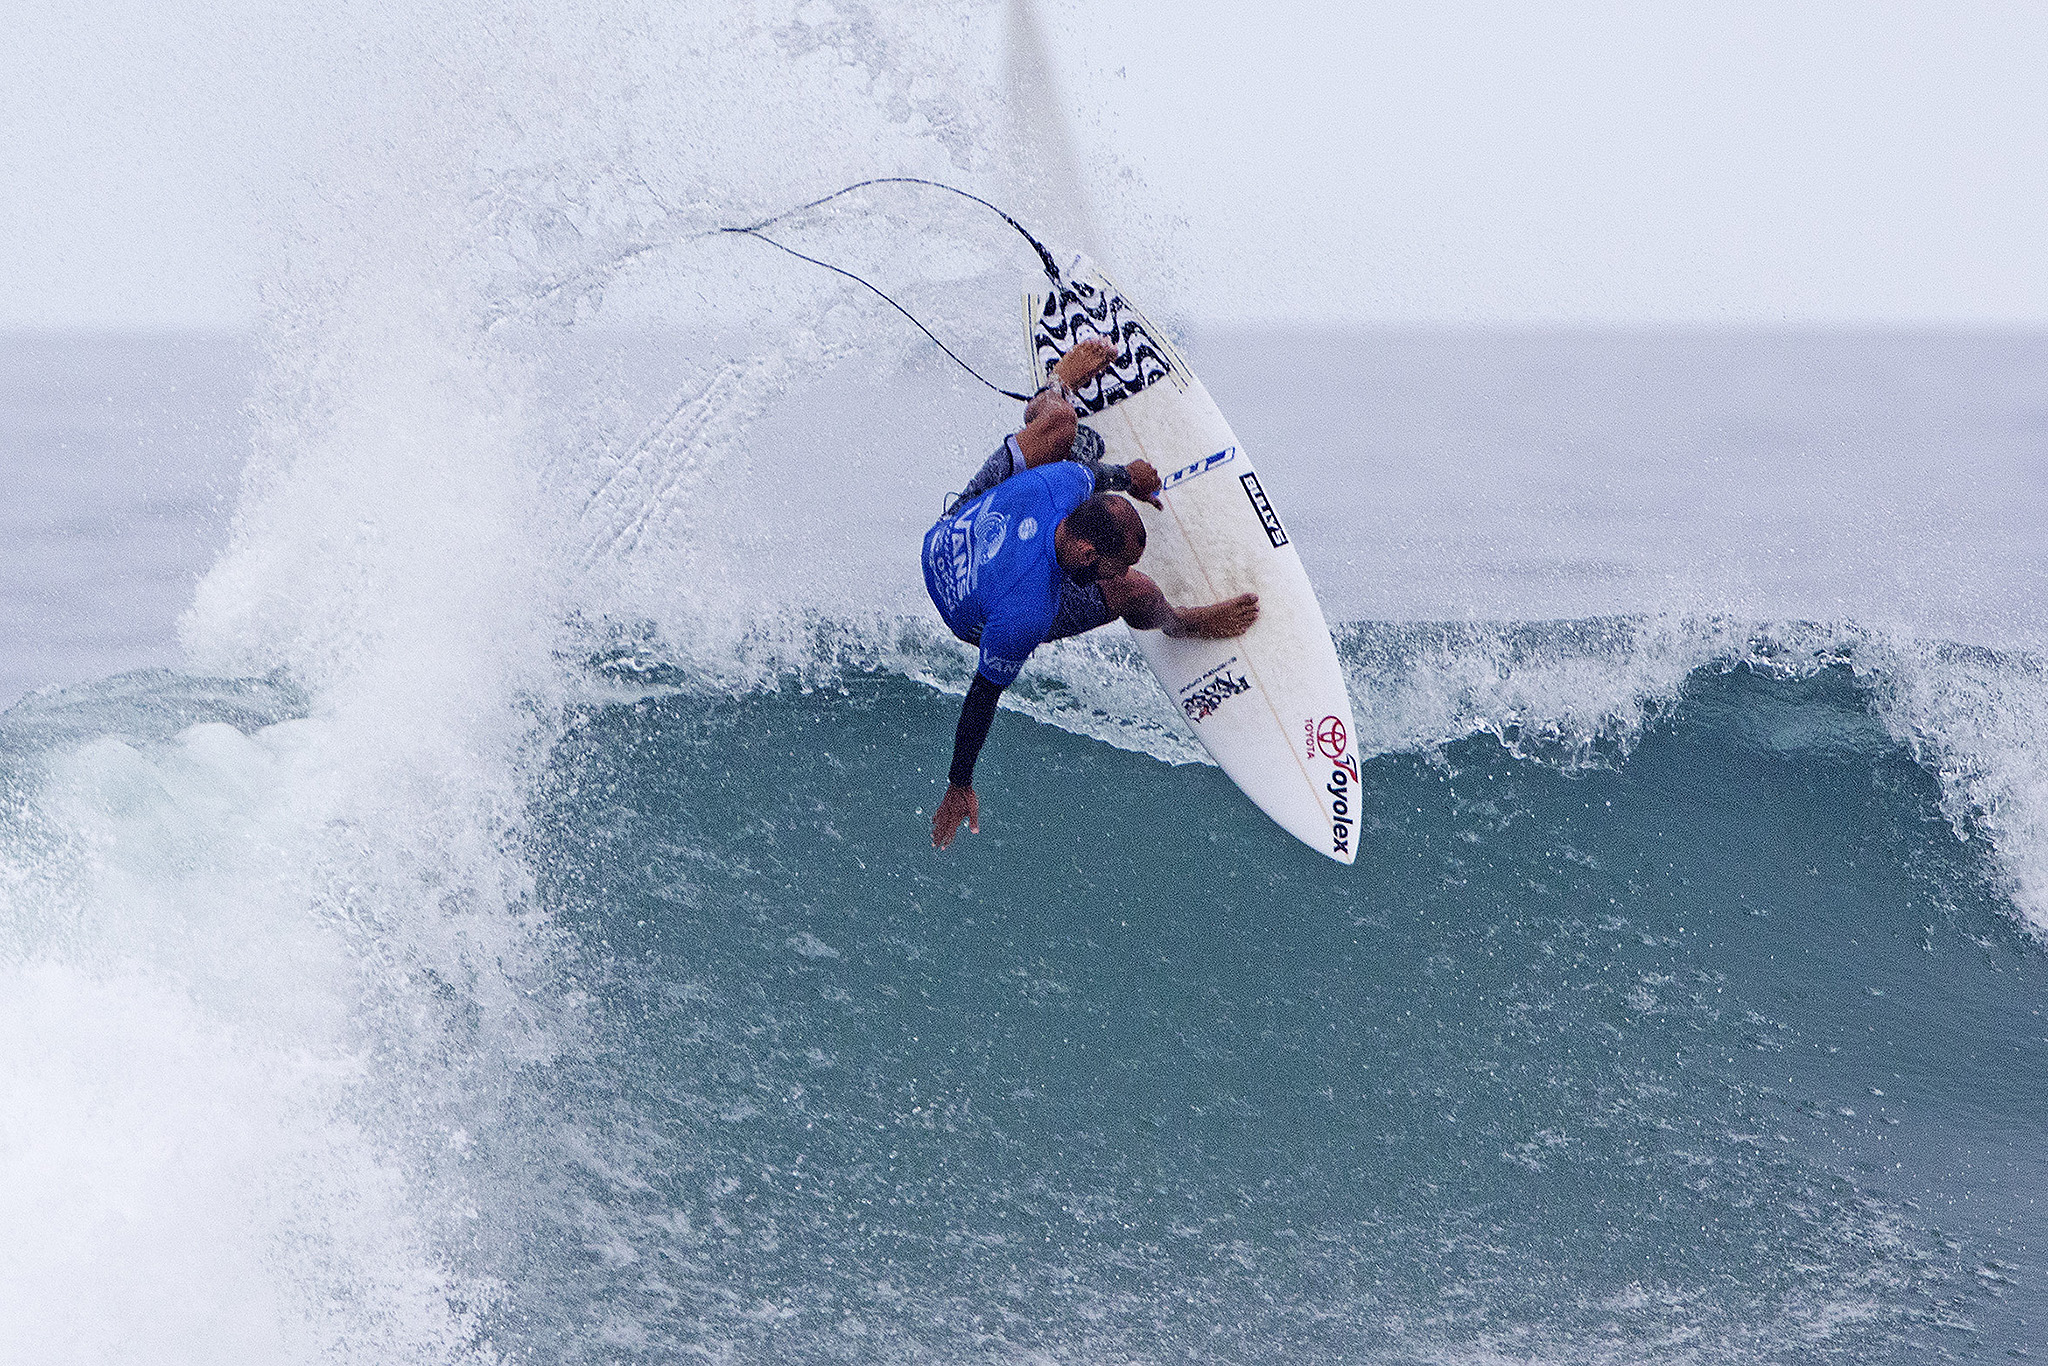 Jadson Andre of Brasil advanced to Round Four of the US Open after winning Heat 9 of Round Three at Huntington Beach, California, USA.